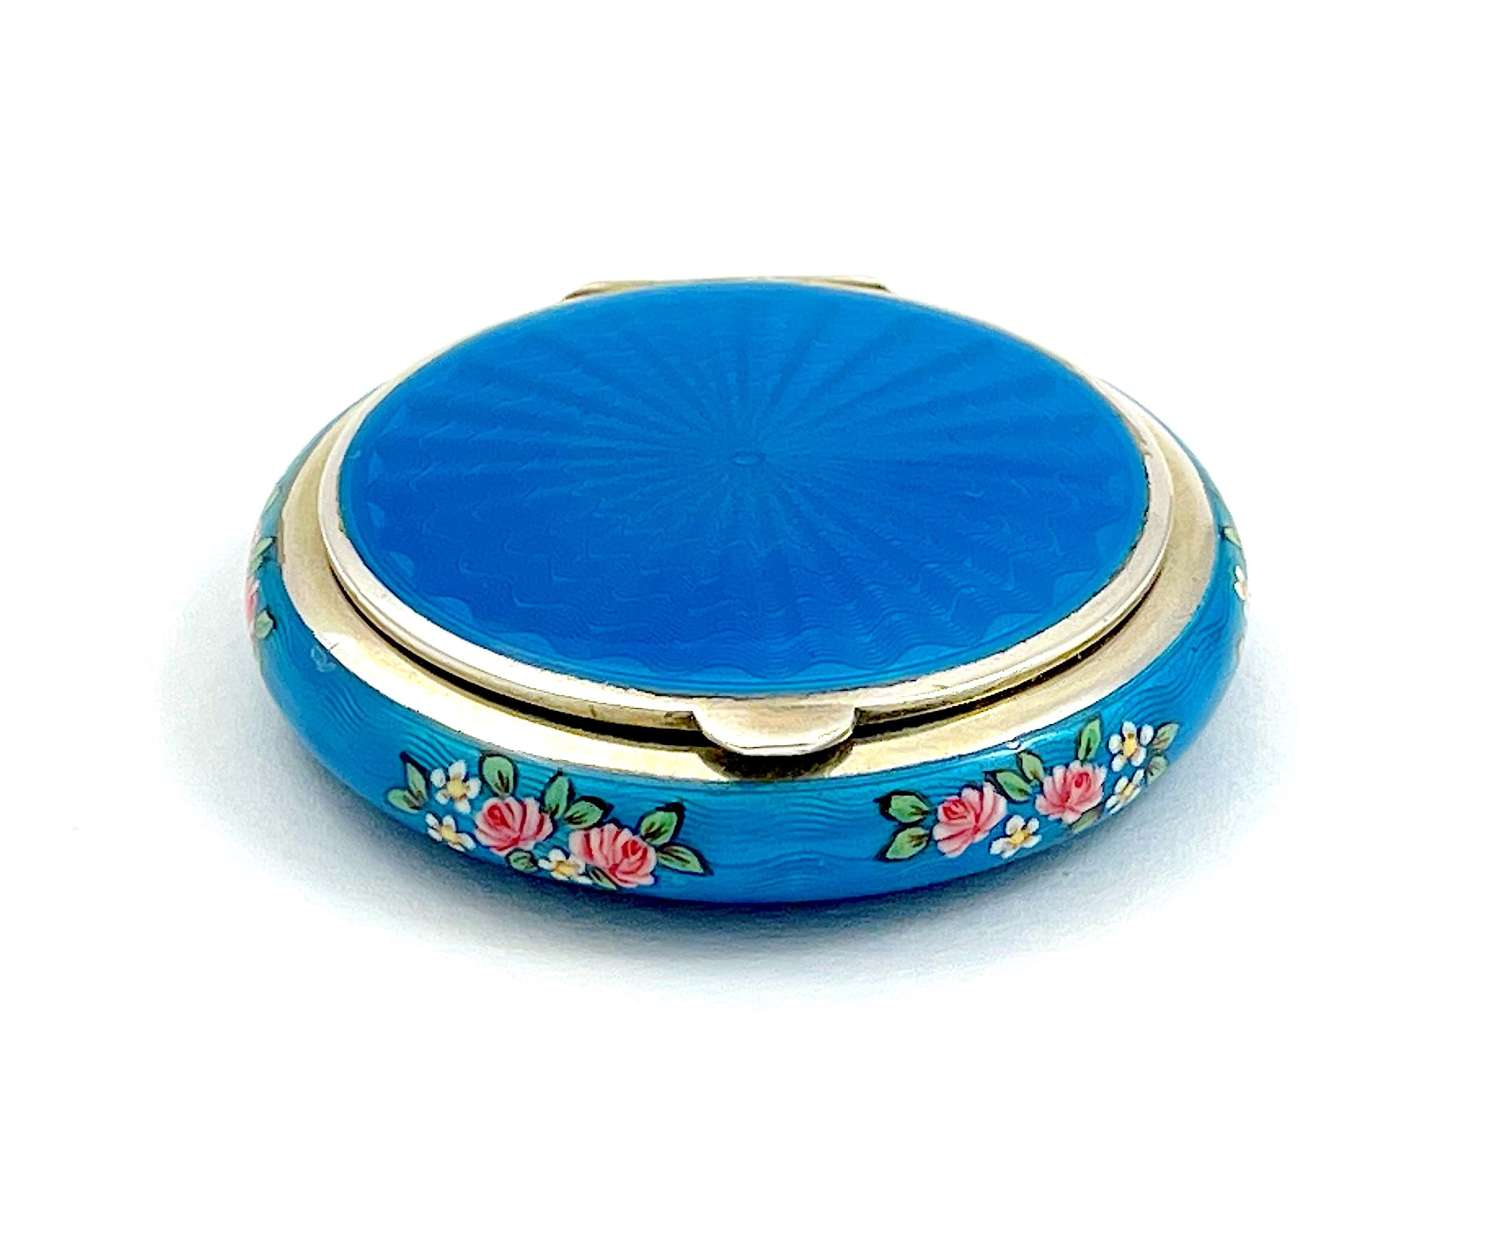 Antique Sterling Silver and Guilloche Enamel Compact Case with Roses